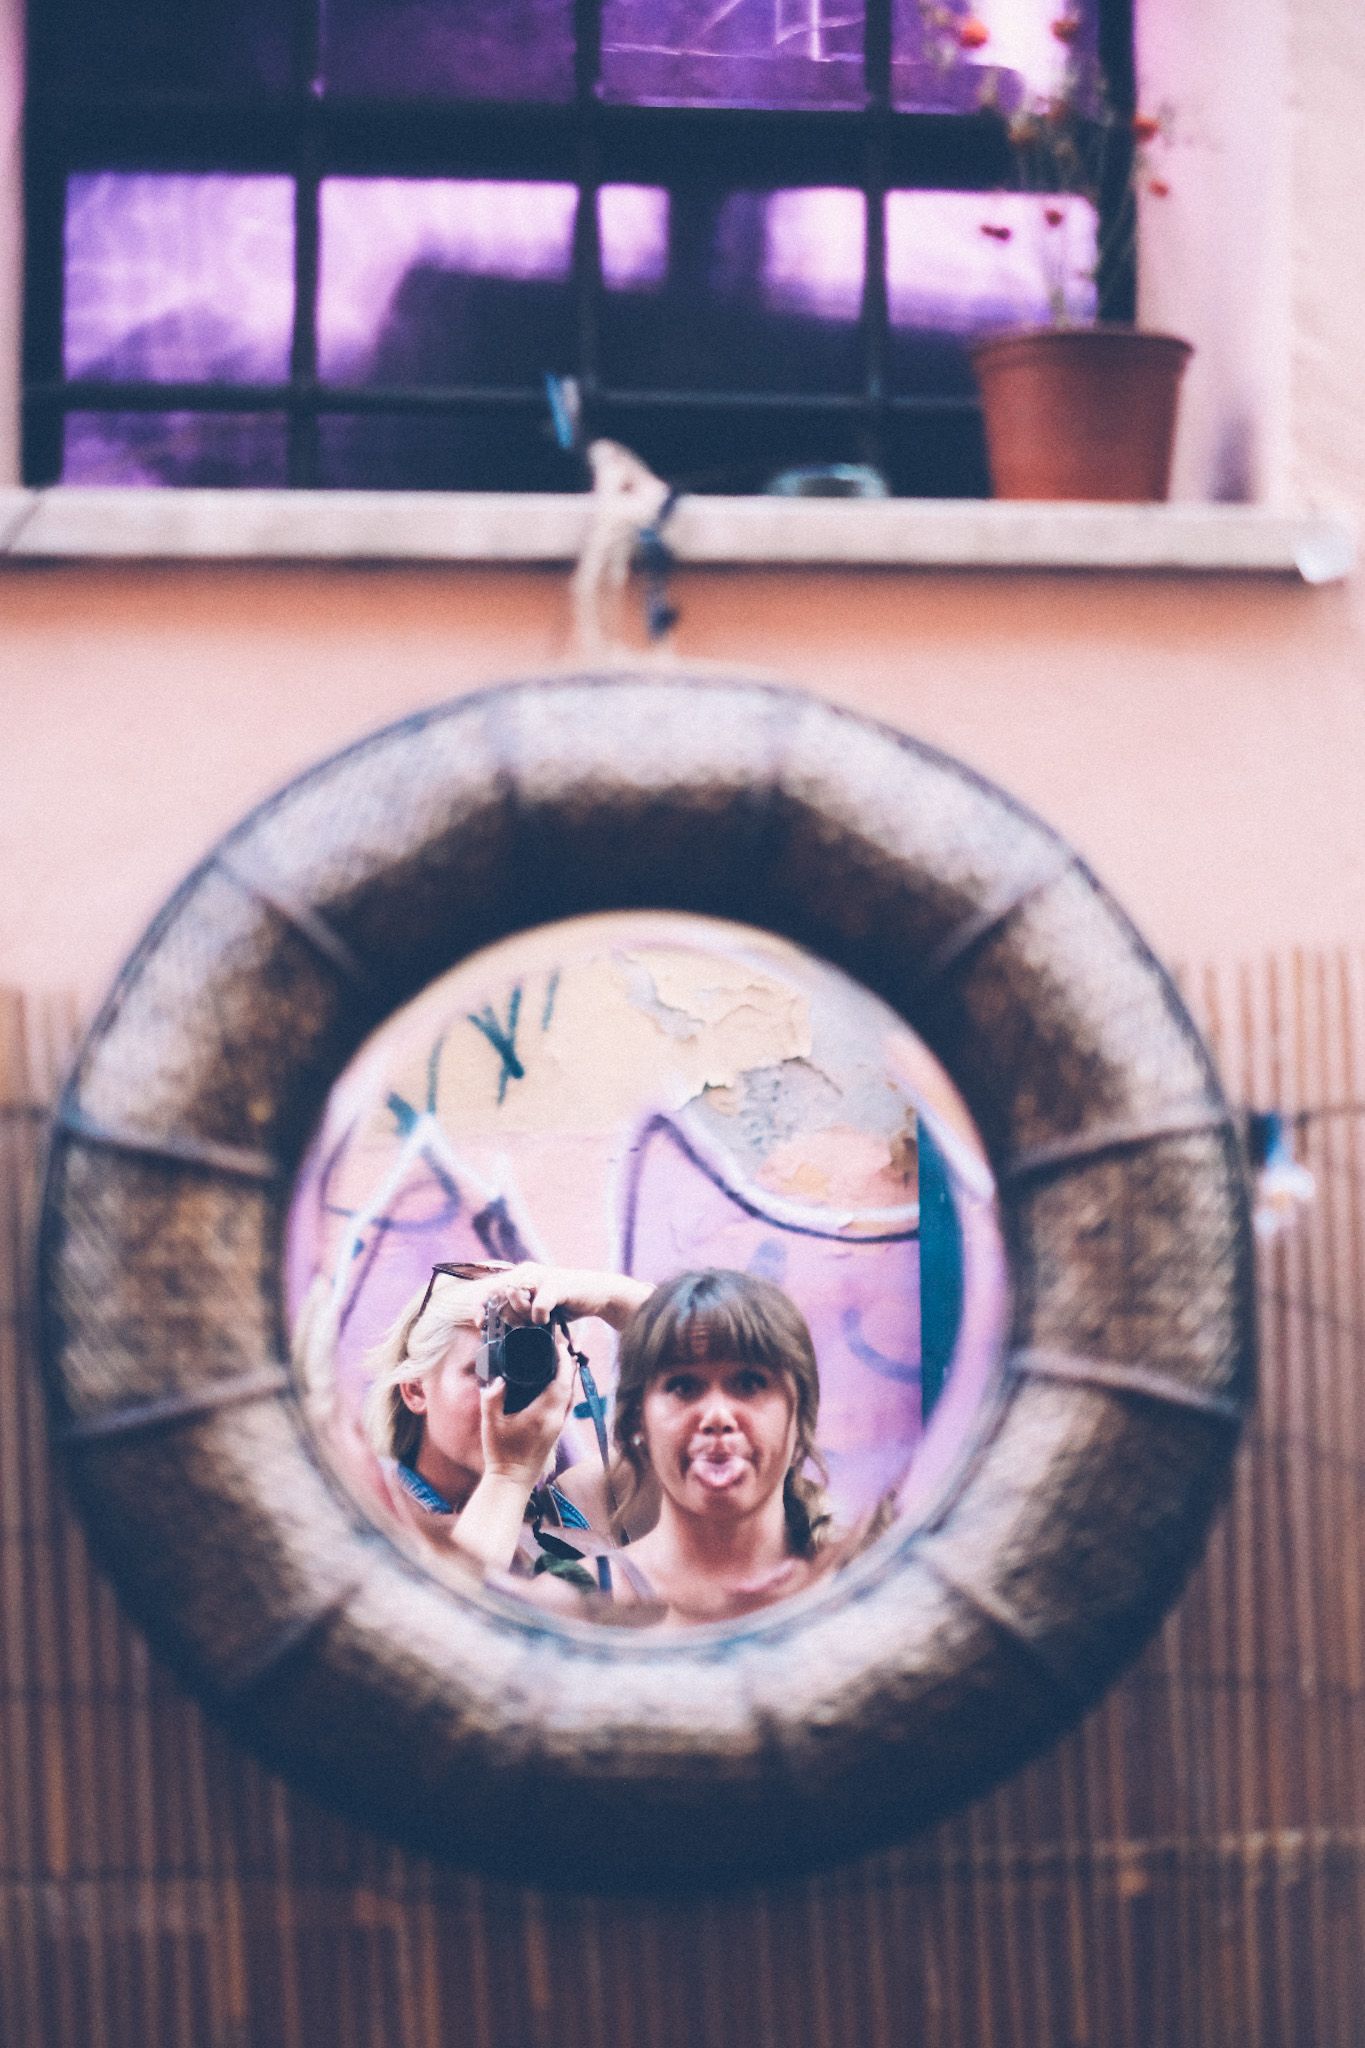 Two women look into a round mirror that looks like a porthole underneath a purple glass window, graffiti in the reflection. The woman in front is making a silly face.